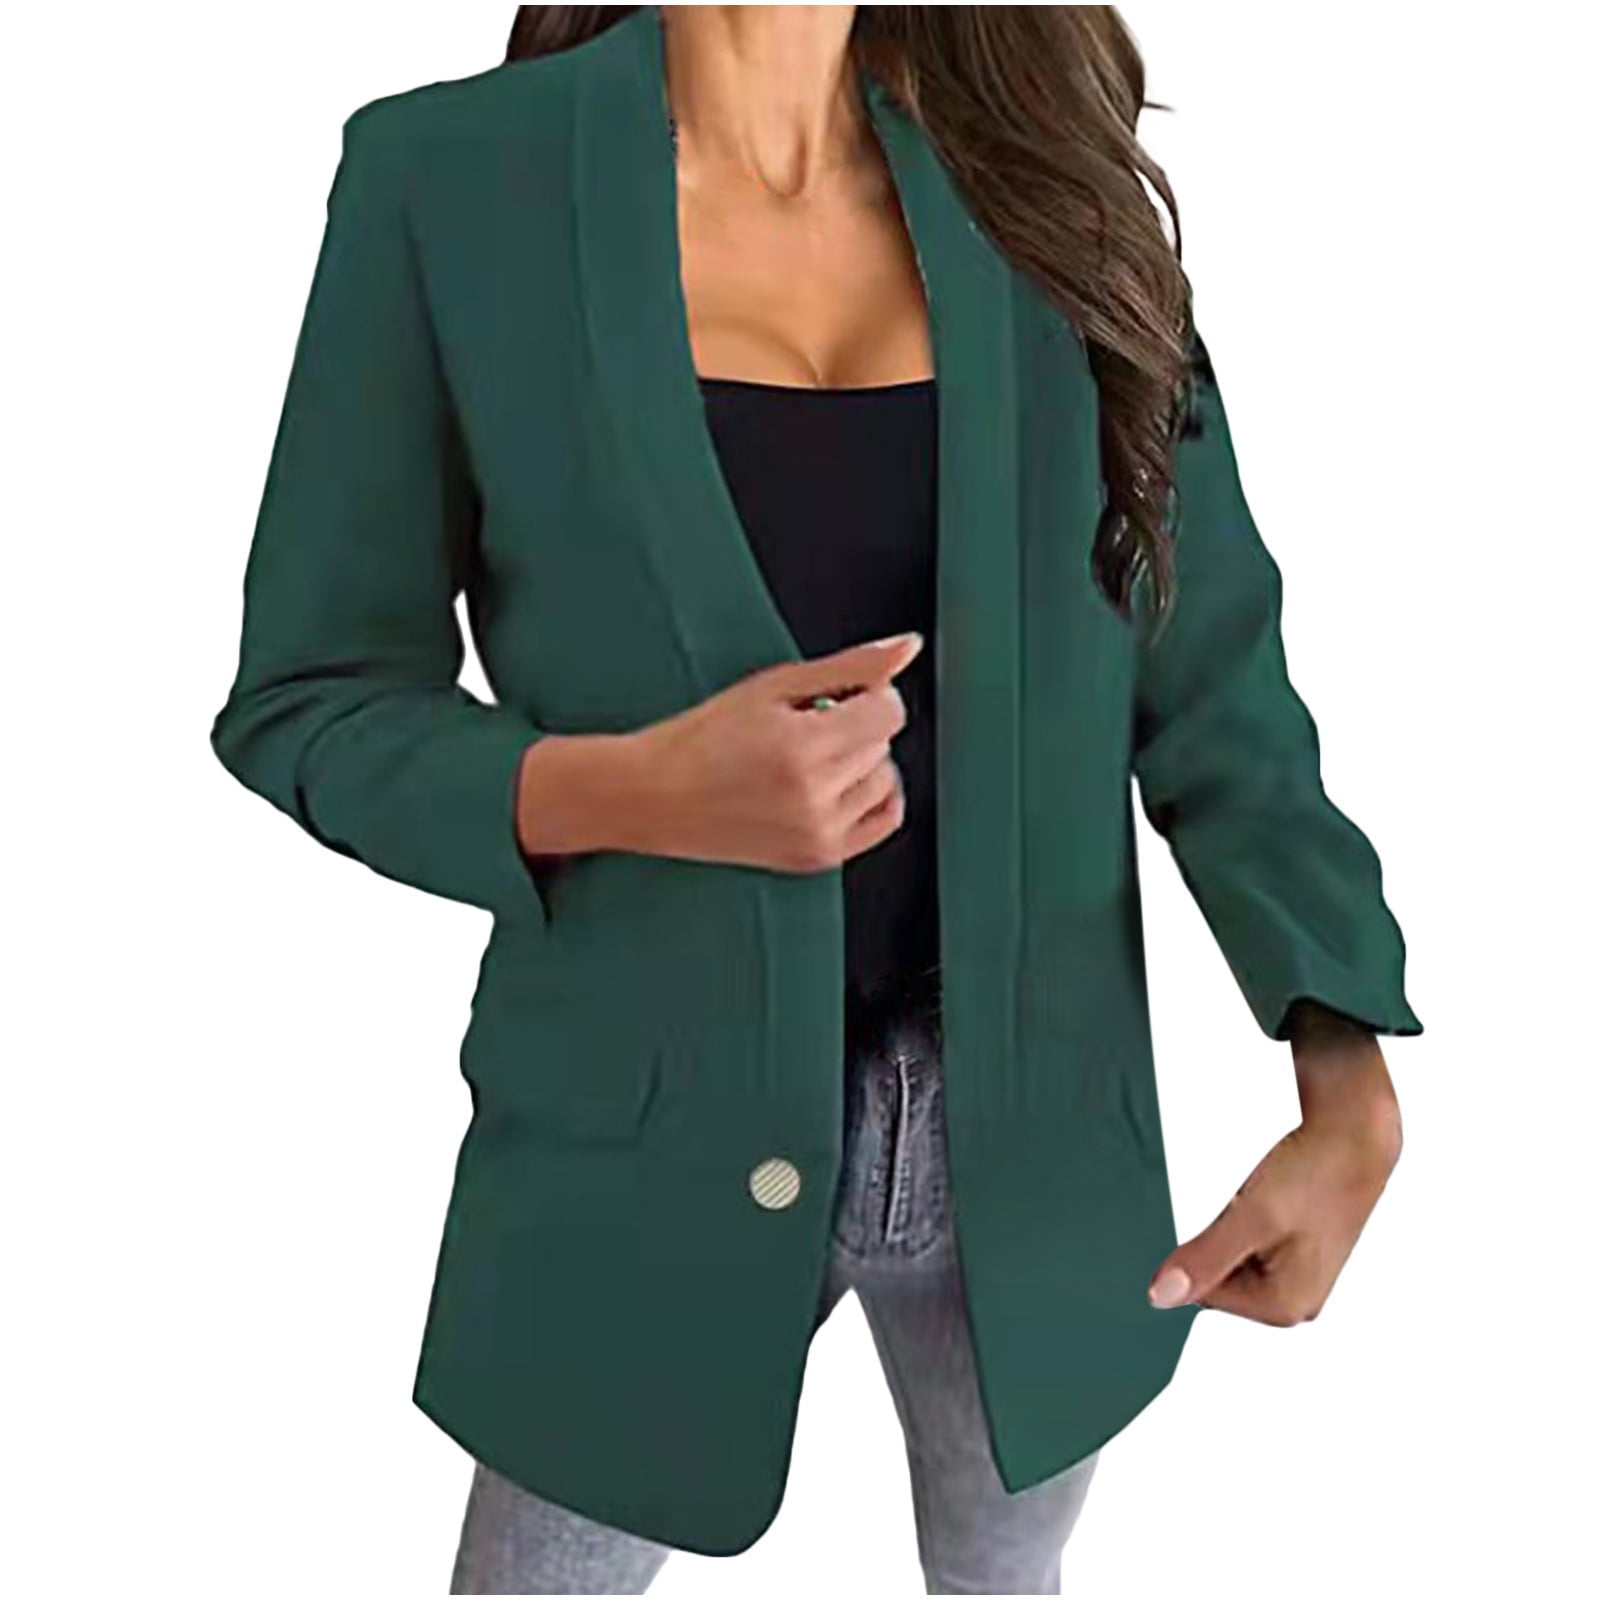 VEKDONE Womens Long Sleeve Open Front Cardigan Jackets Casual Work Office Color Block Blazer Suit Jackets Coats 